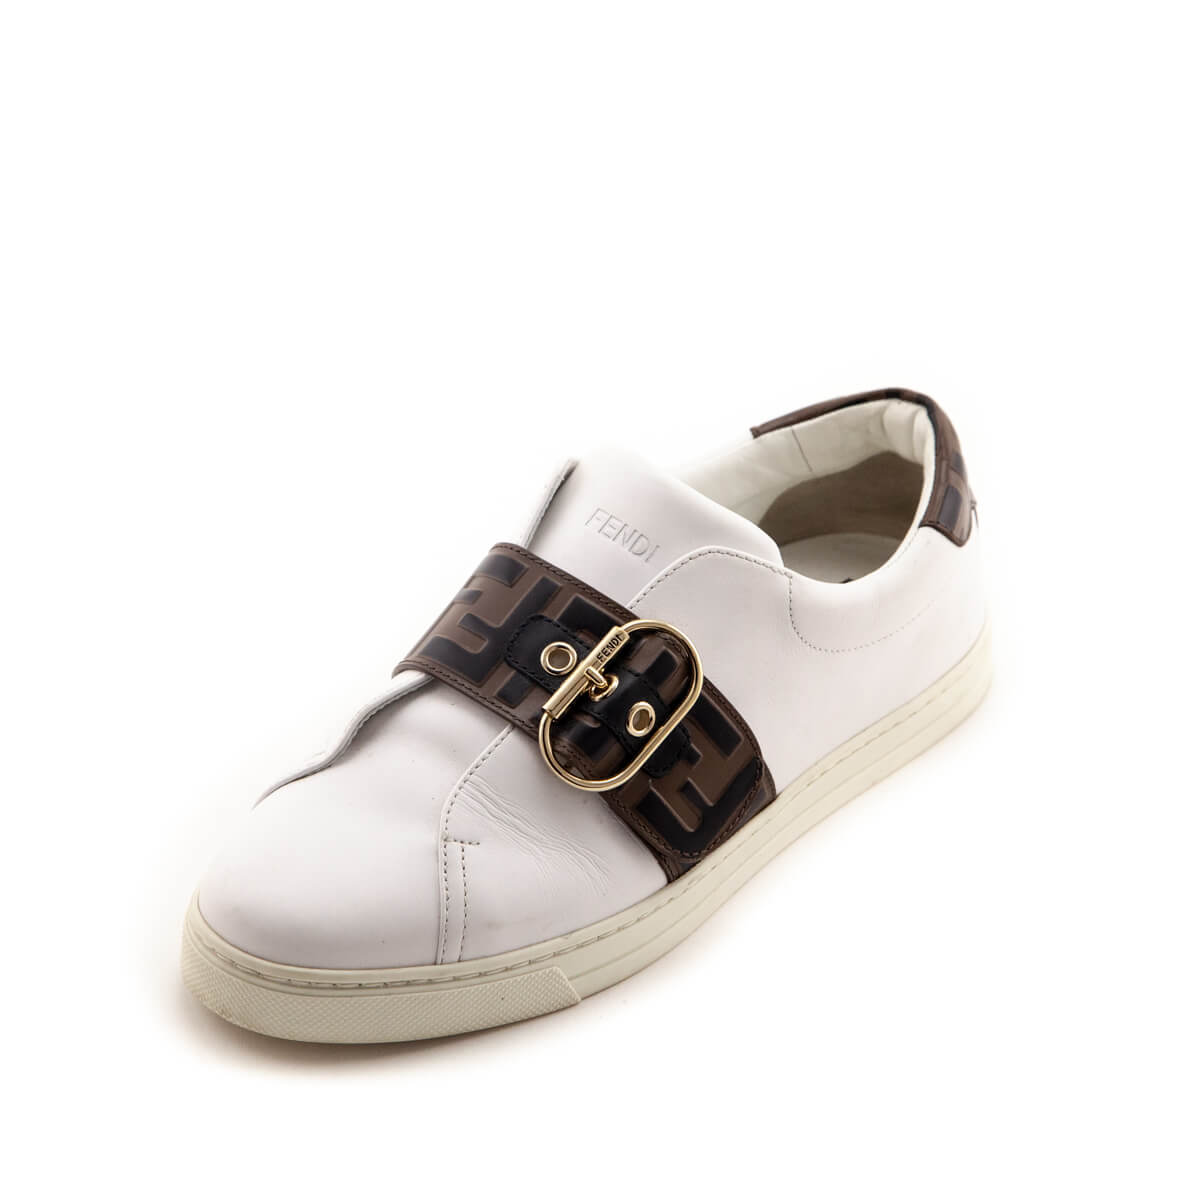 Fendi White Leather Signature Zucca Buckled Low Top Sneakers Size 9.5 | EU 39.5 - Love that Bag etc - Preowned Authentic Designer Handbags & Preloved Fashions